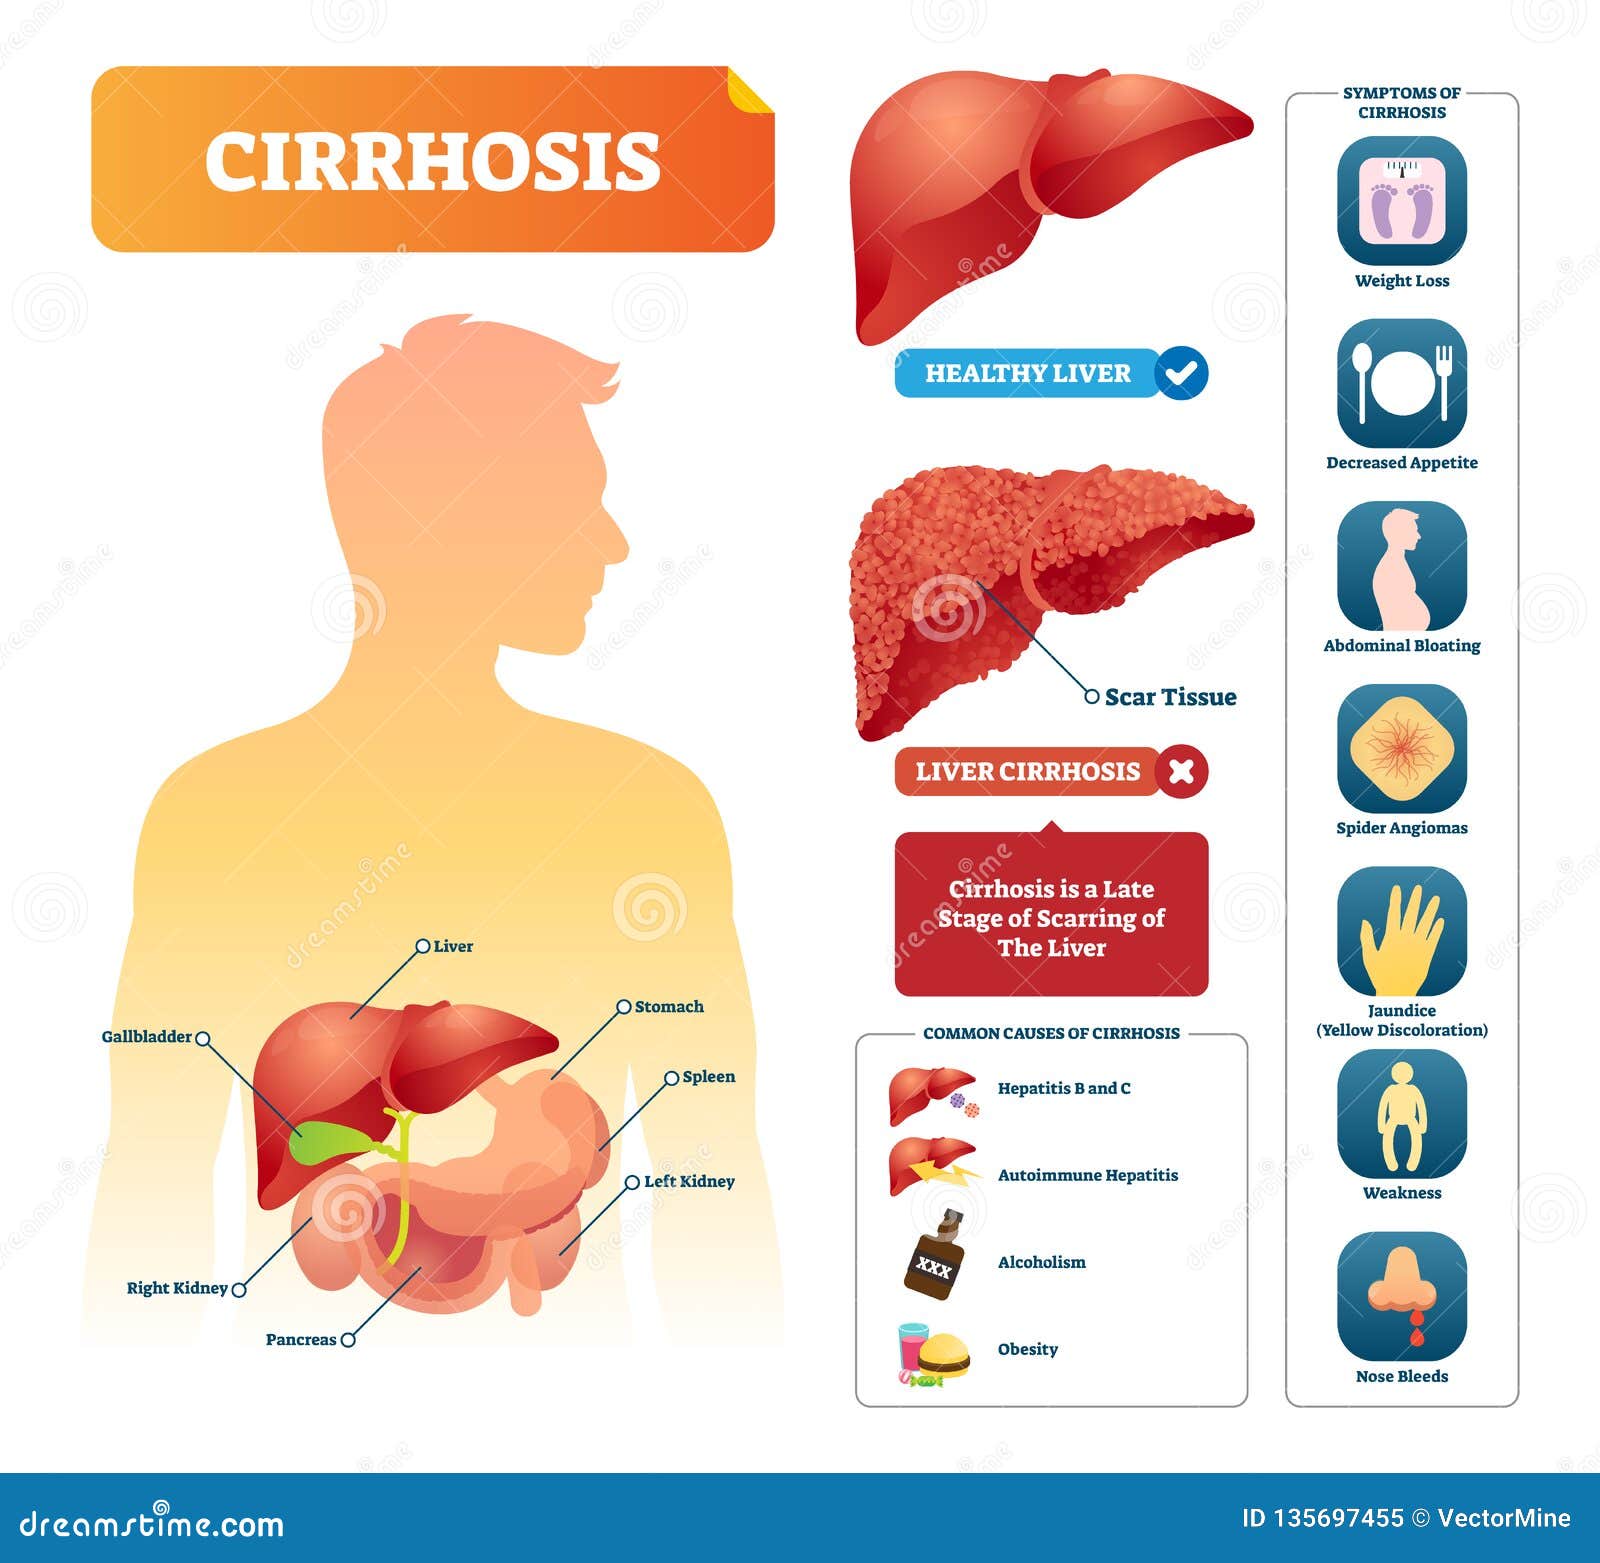 Cirrhosis Vector Illustration. Labeled Medical Diagram with Illness ...